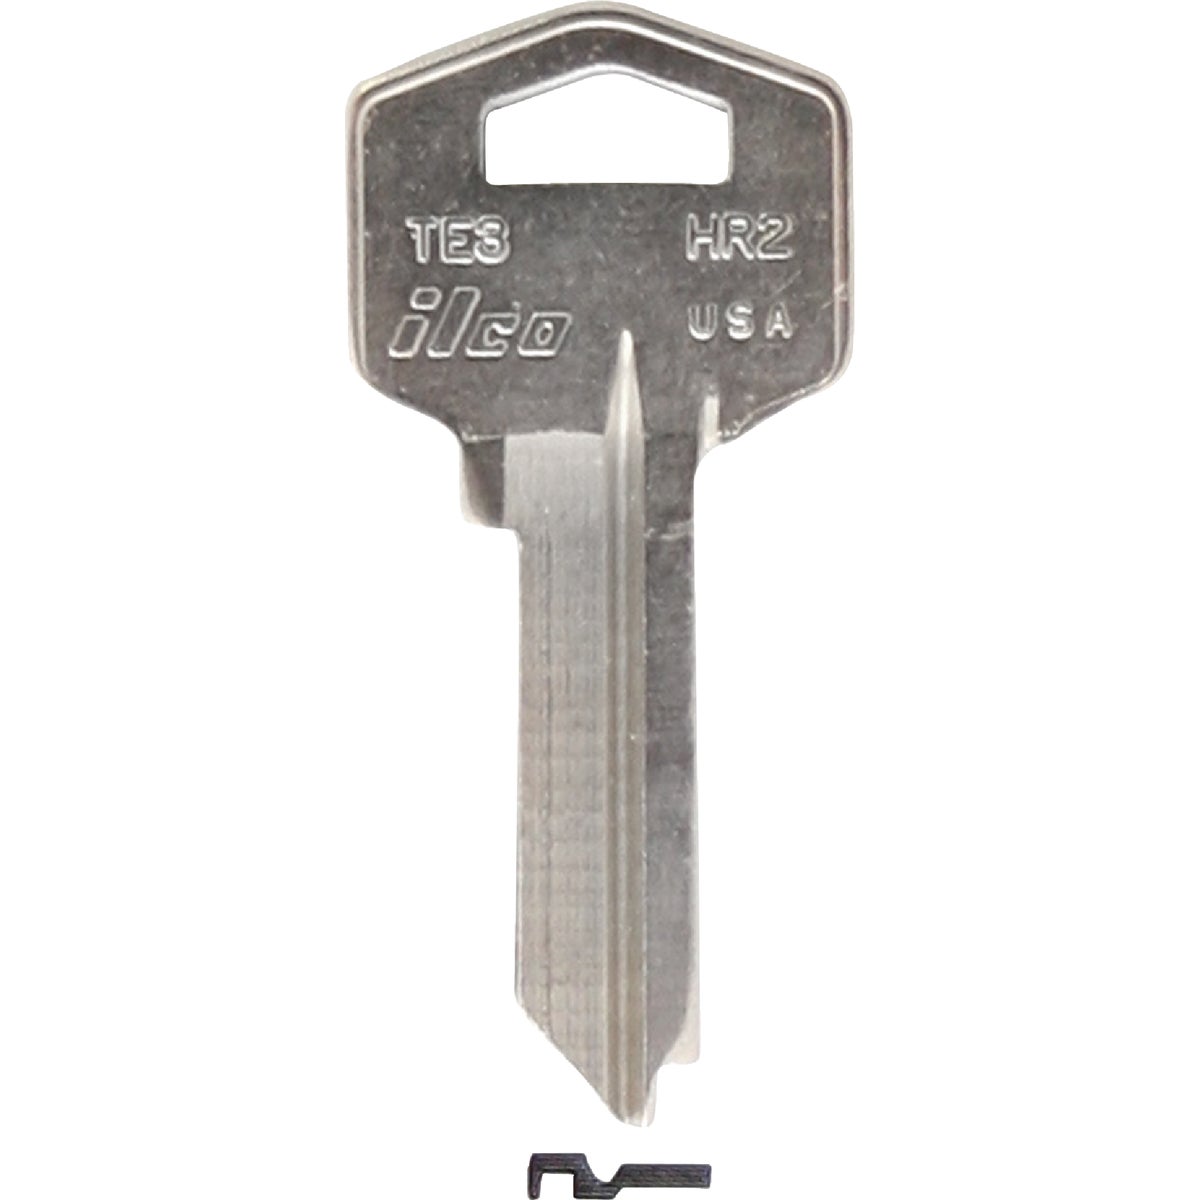 Item 218413, Nickel-plated key blank. When you order one, you will receive 10 keys.